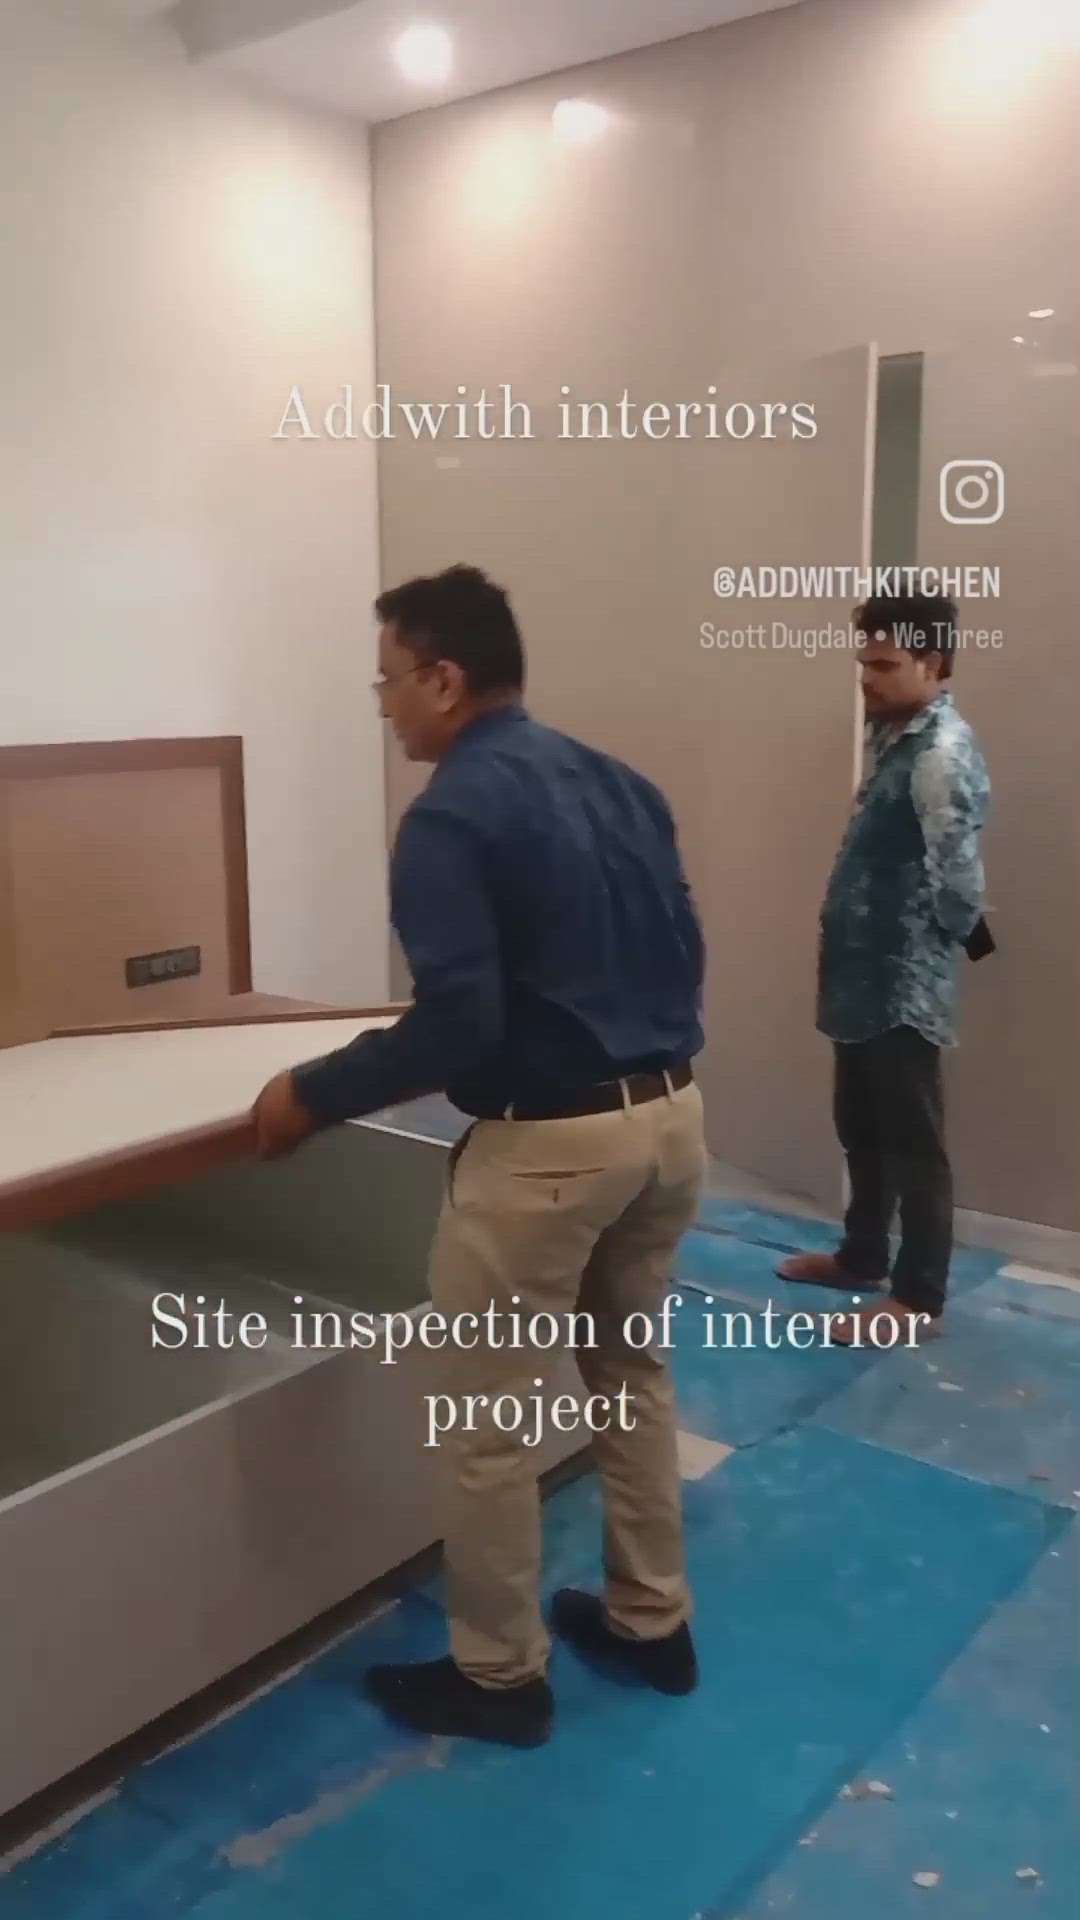 Site inspection of interior project at patrakar mansarovar in Jaipur
#Hydrolic bed wardrobe, tv unit paneling Modular Kitchen and wallpaper etc work is going on this site.
Please follow for the full video of this interior site coming soon.
#hydrolicbed #wardrobe #modularkitchen #wardrobeideas #tvunitinterior #homeinteriordesign #interiordesigner #addwithmodularkitchen #addwithkitchen #addwithinterior #jaipurinteriors #kitchendesigner #kitchen3ddesign  #KitchenIdeas #modularkitchennearme #sofaset